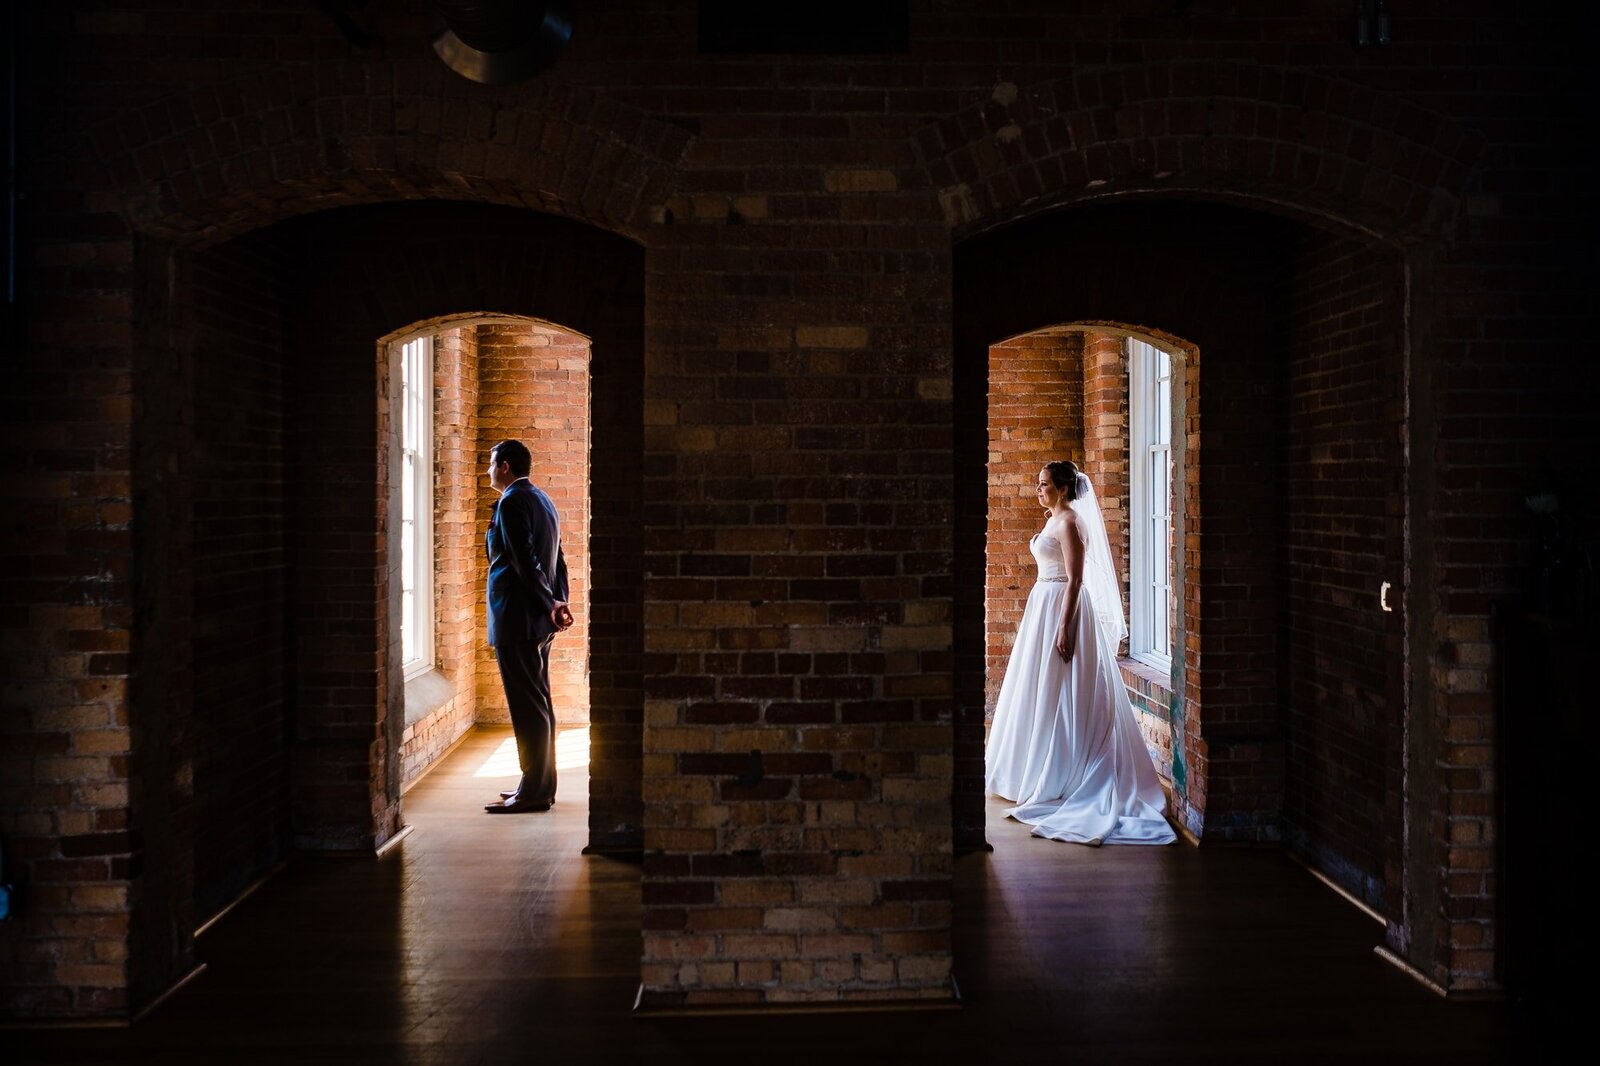 Bride stands behind groom the moment before their first look. He is seen through an archway on the left, and she is seen through another archway on the right